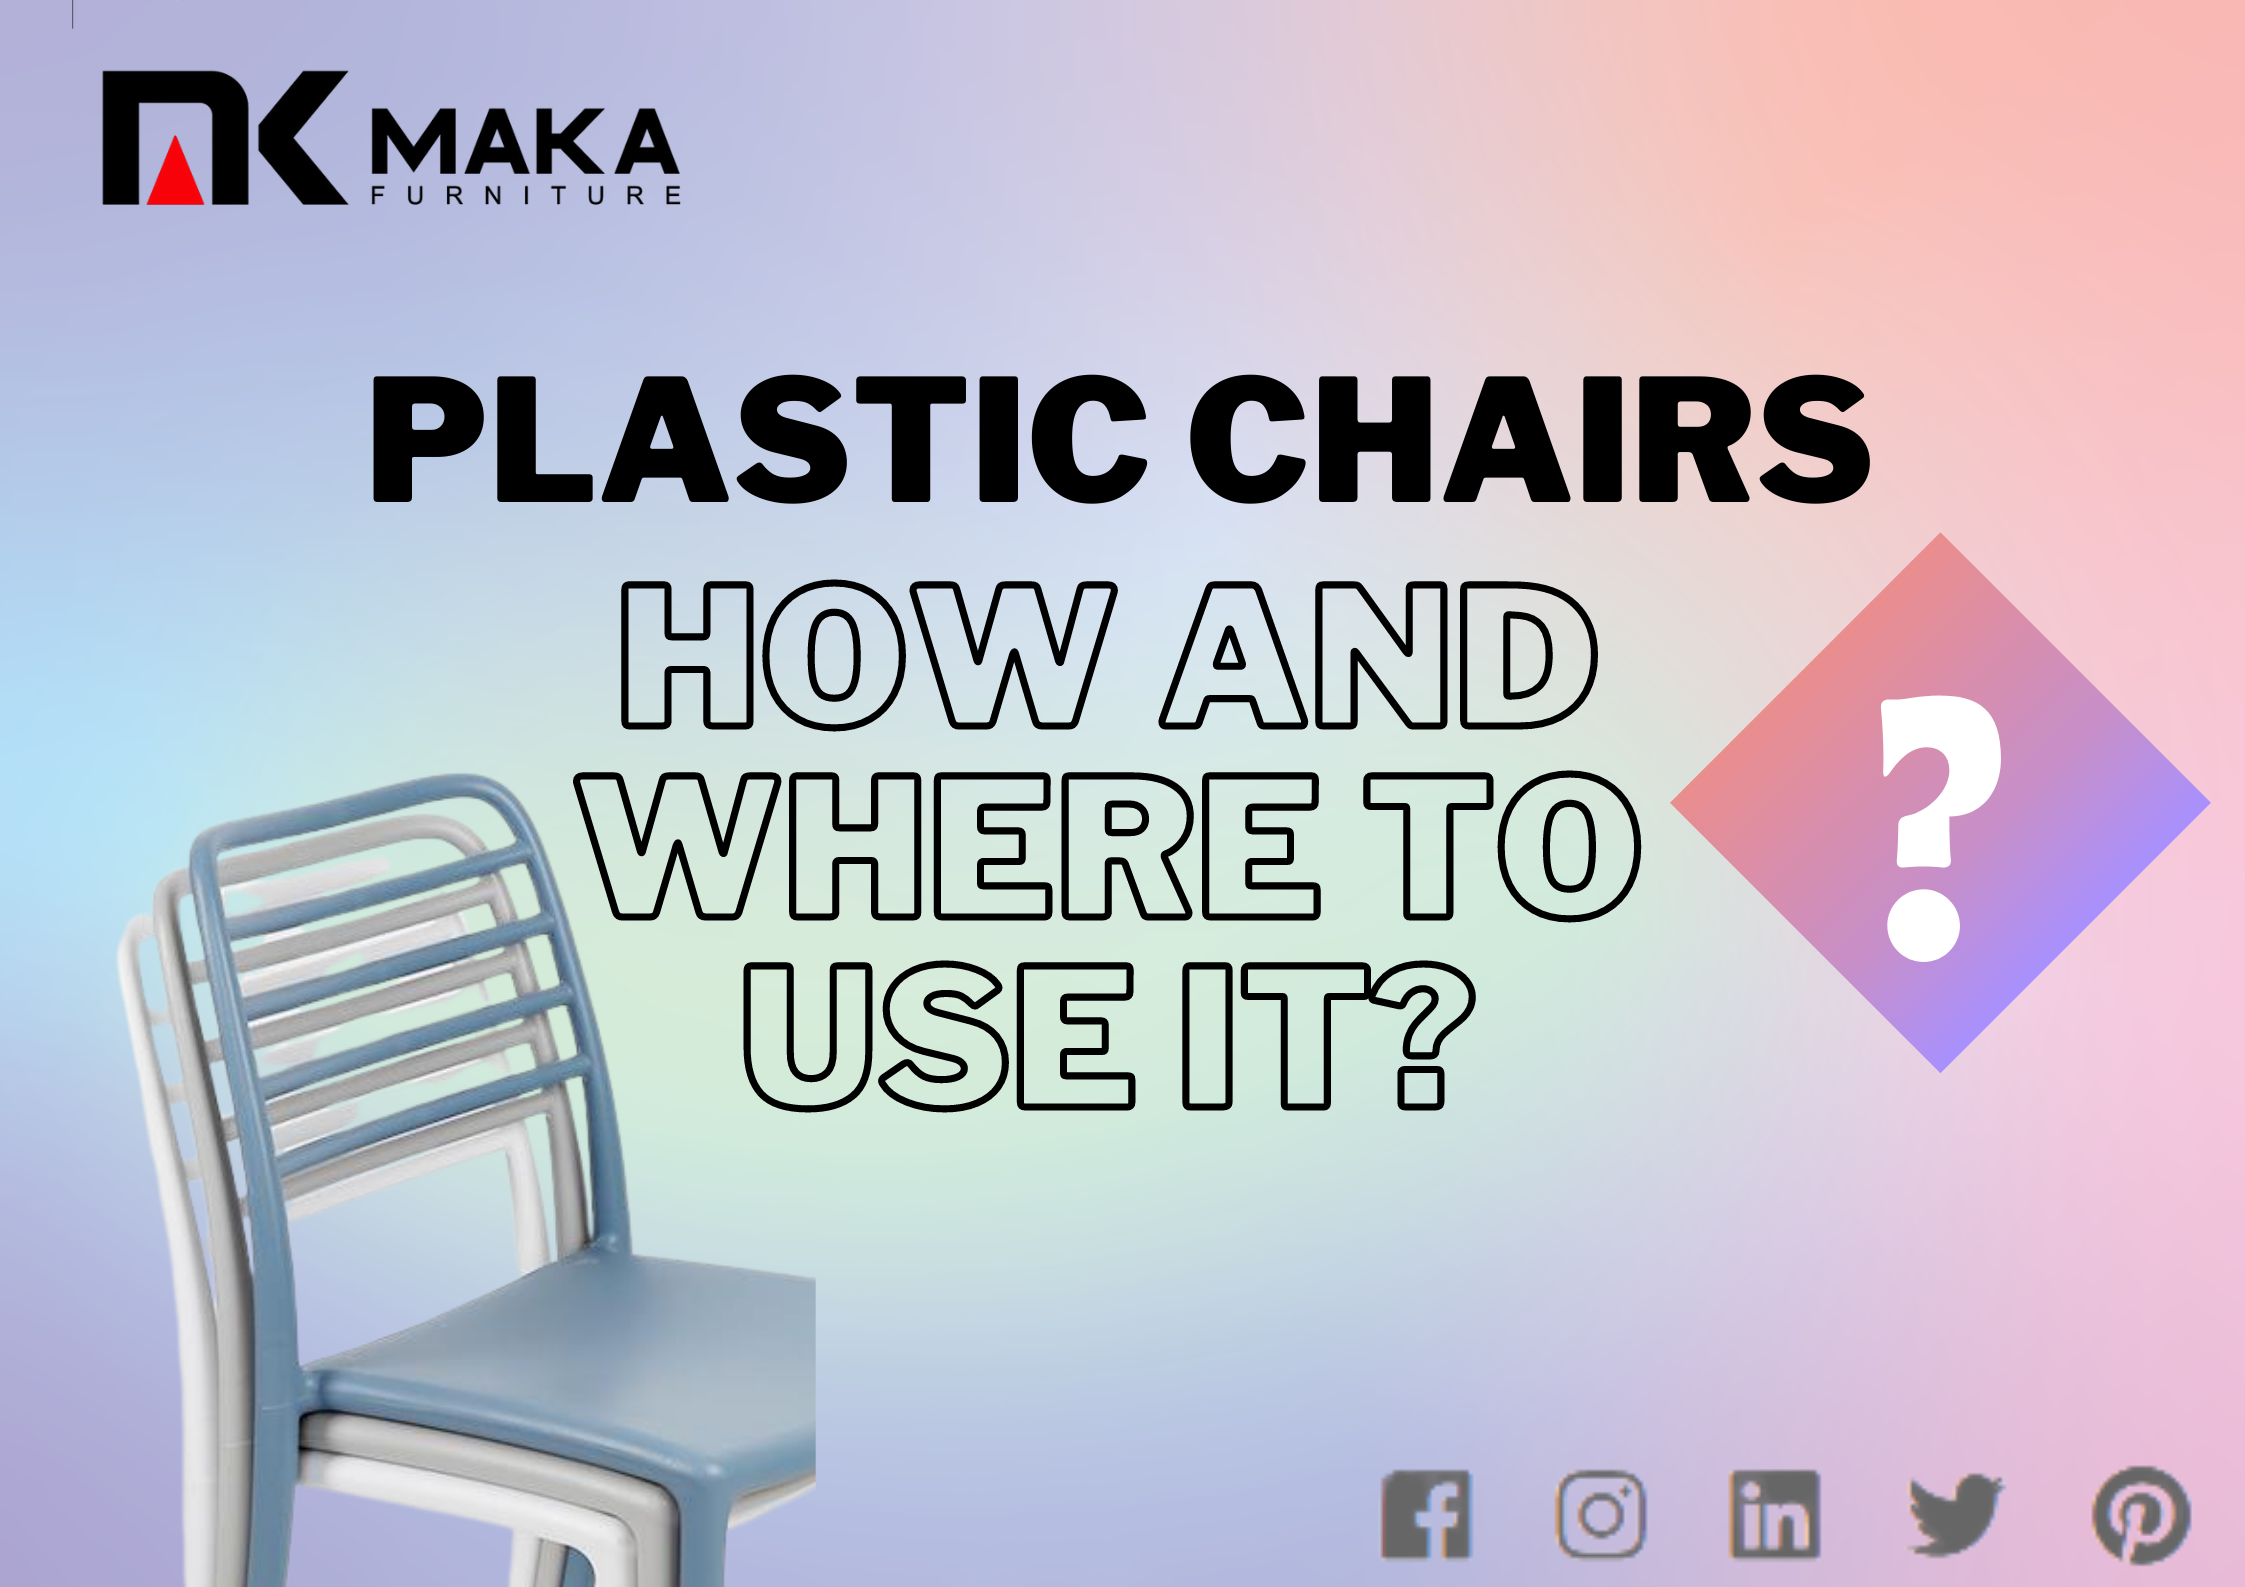 Plastic chairs How and where to use it